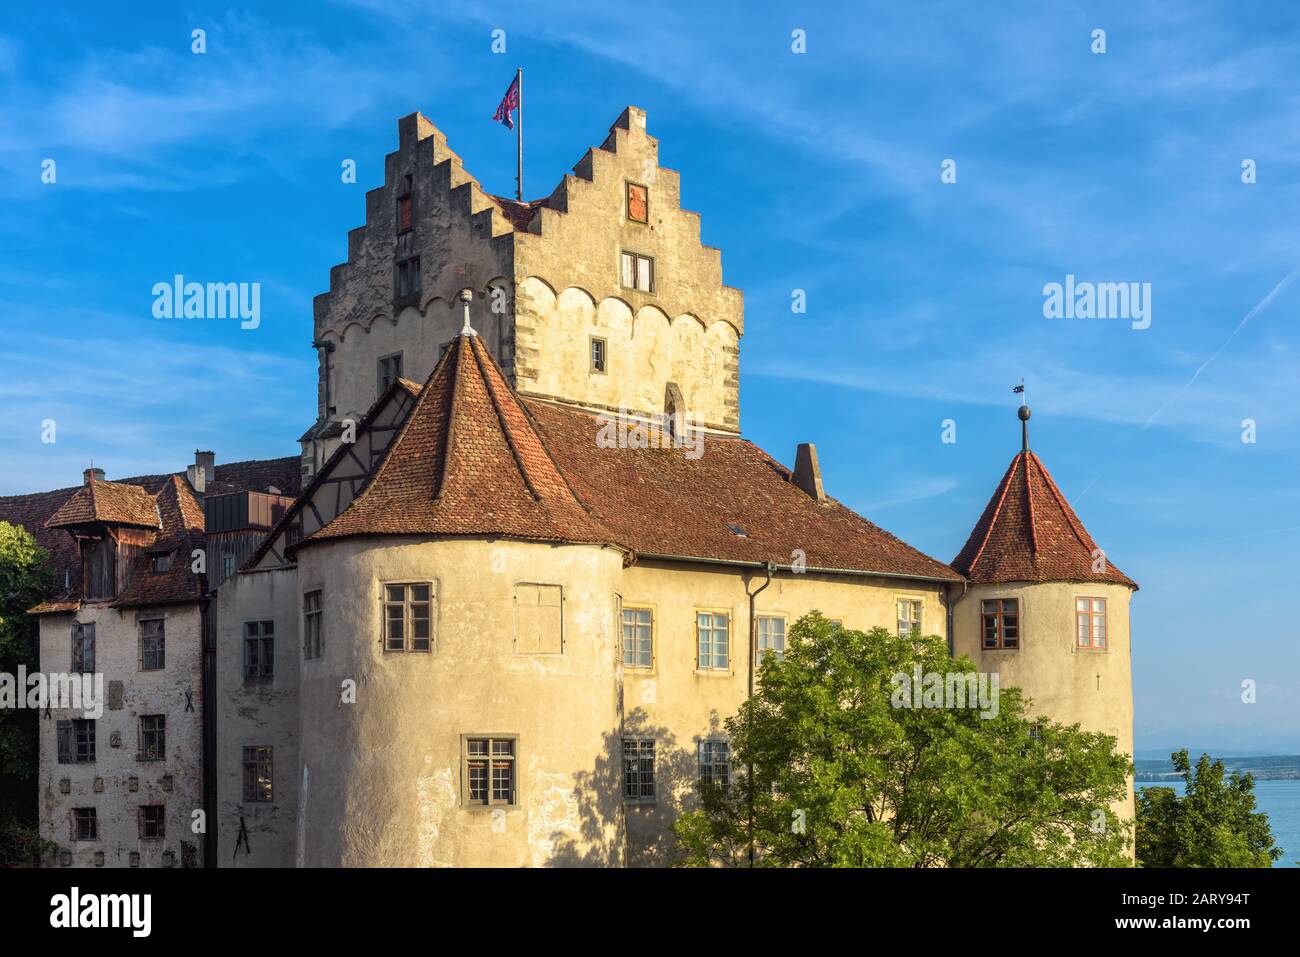 Meersburg Castle at Lake Constance or Bodensee, Germany. This medieval castle is landmark of town. Closeup view to old German castle in summer. Scener Stock Photo